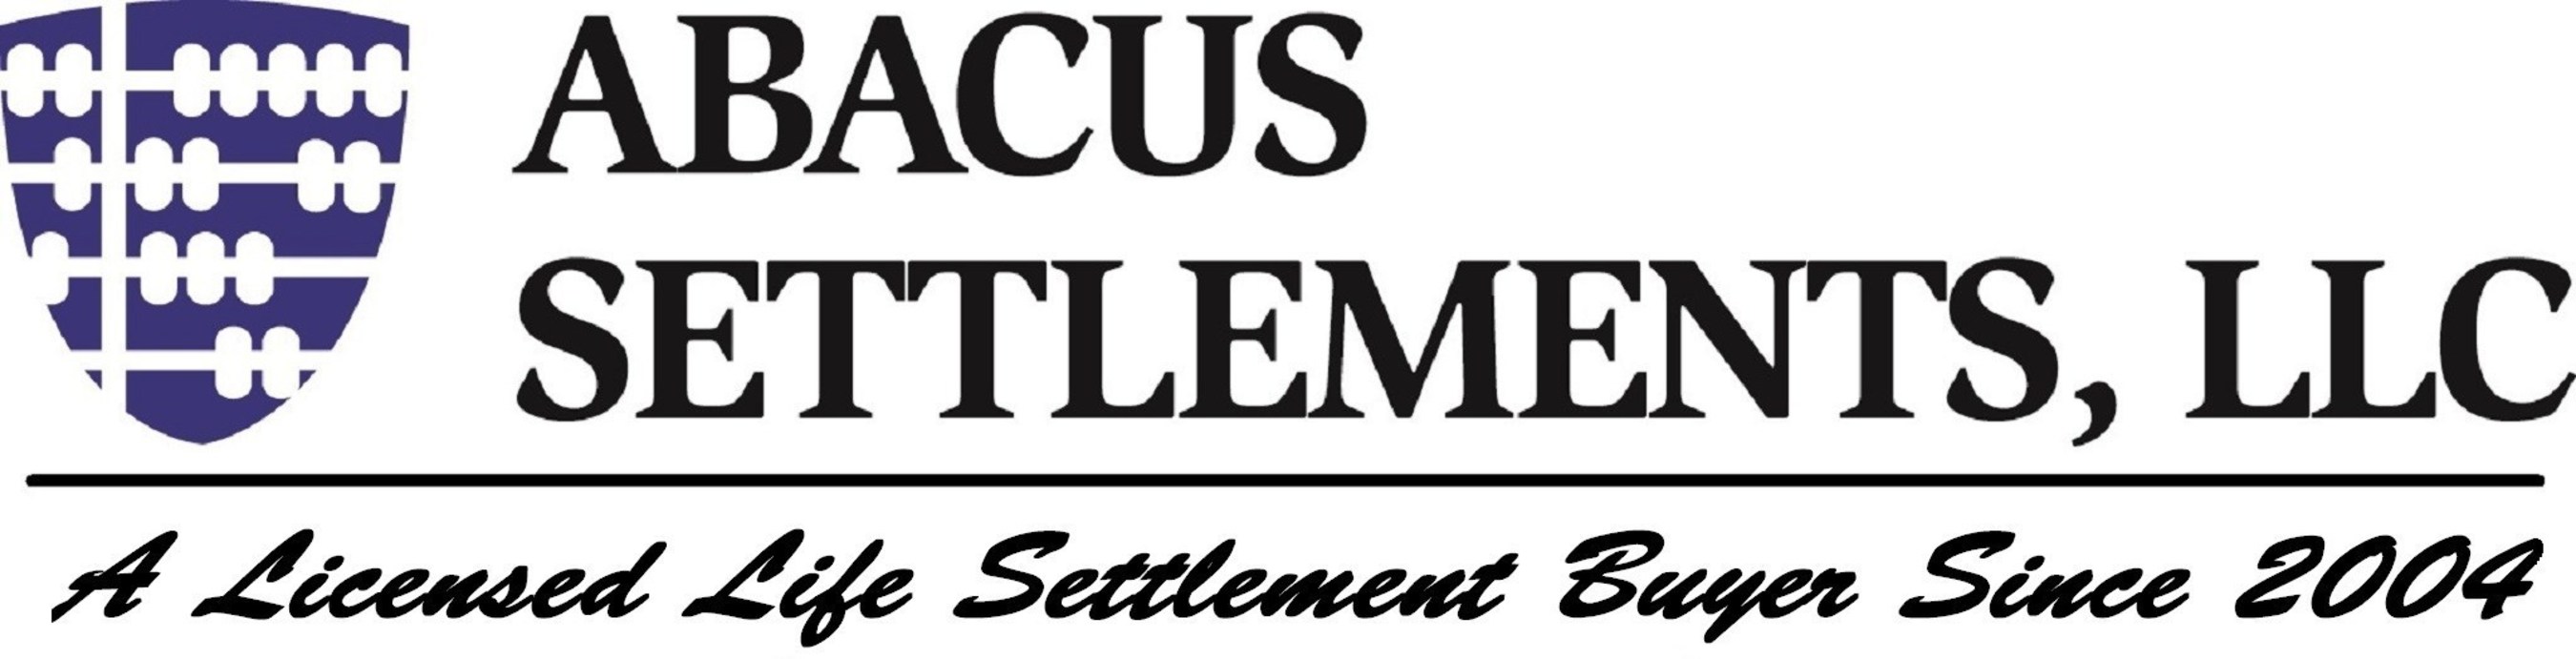 Abacus Life Settlements is a licensed life settlement buyer since 2004. Originally formed in New York's financial district and now with offices in NY & Tennessee, Abacus Settlements, is a distinguished Provider of Life Settlements since 2004. Abacus shareholders and officers have been leaders in the Life Settlement industry since the industries inception in the mid 90's. Abacus Life Settlements strongly supports regulation that protects Consumers. Call Us Today 615-732-6241 https://abacuslifesettlements.com